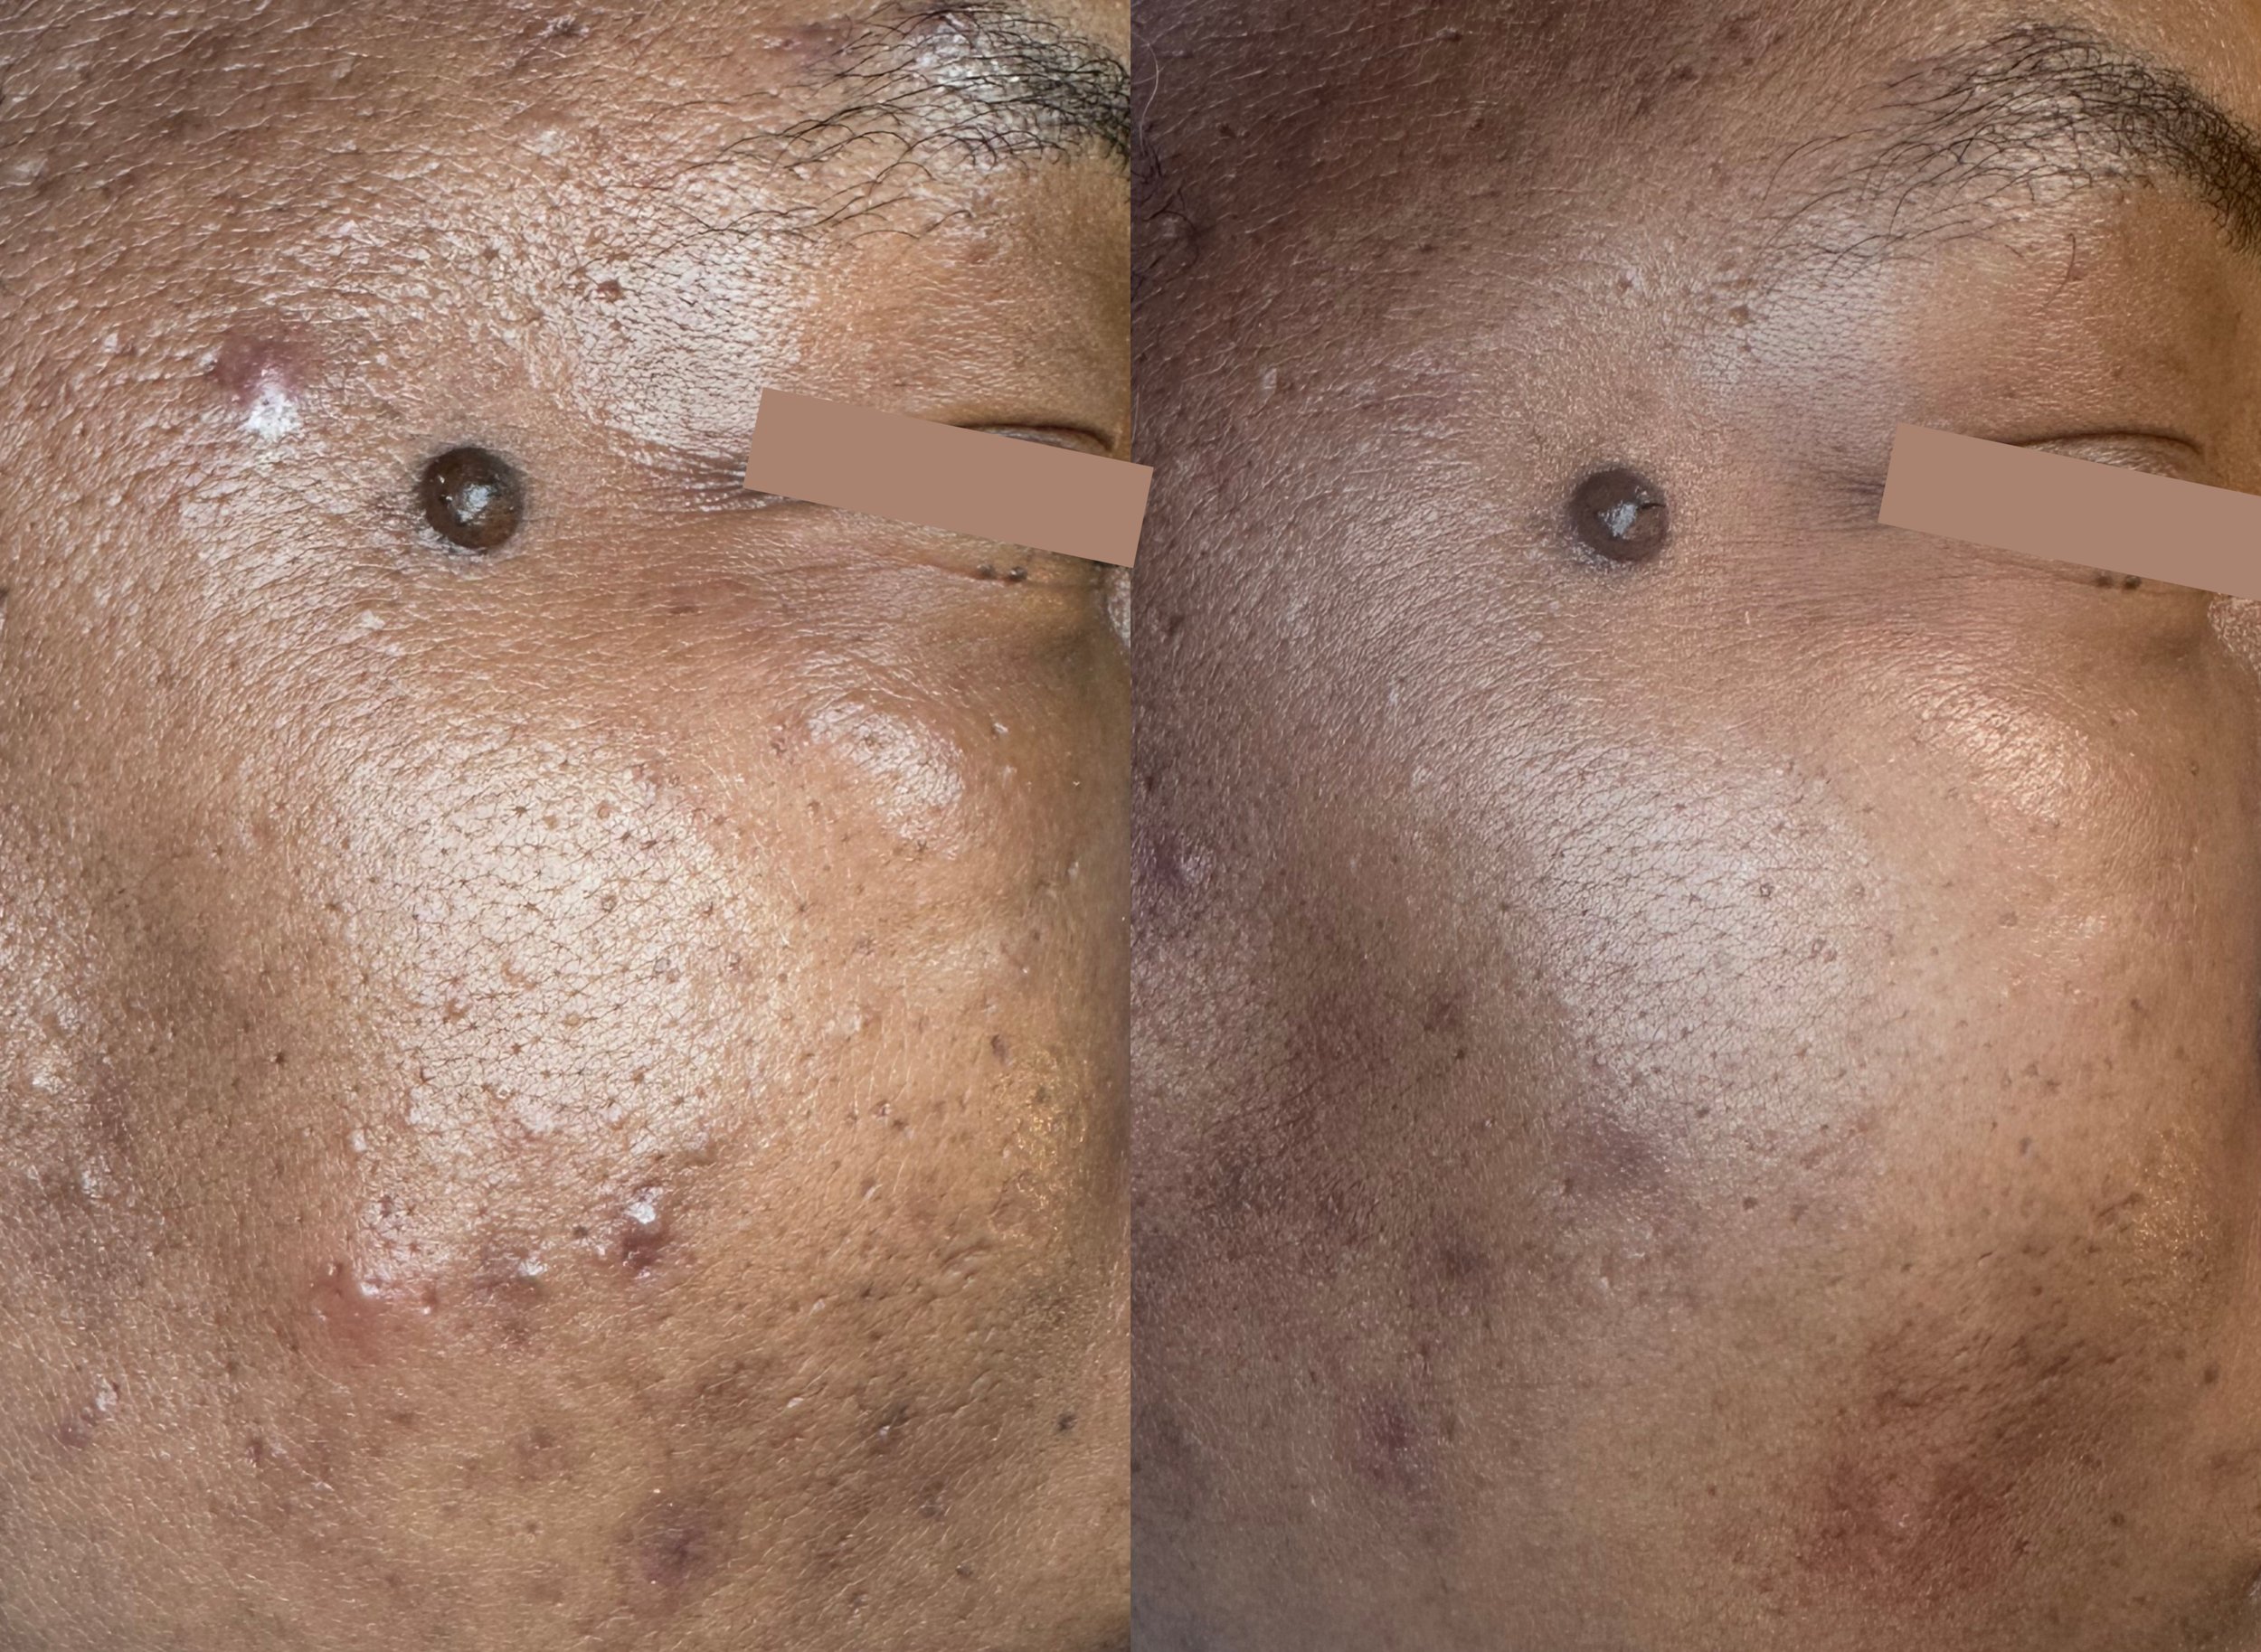  cystic acne cleared following a series of our 12 step-hi tech facials 